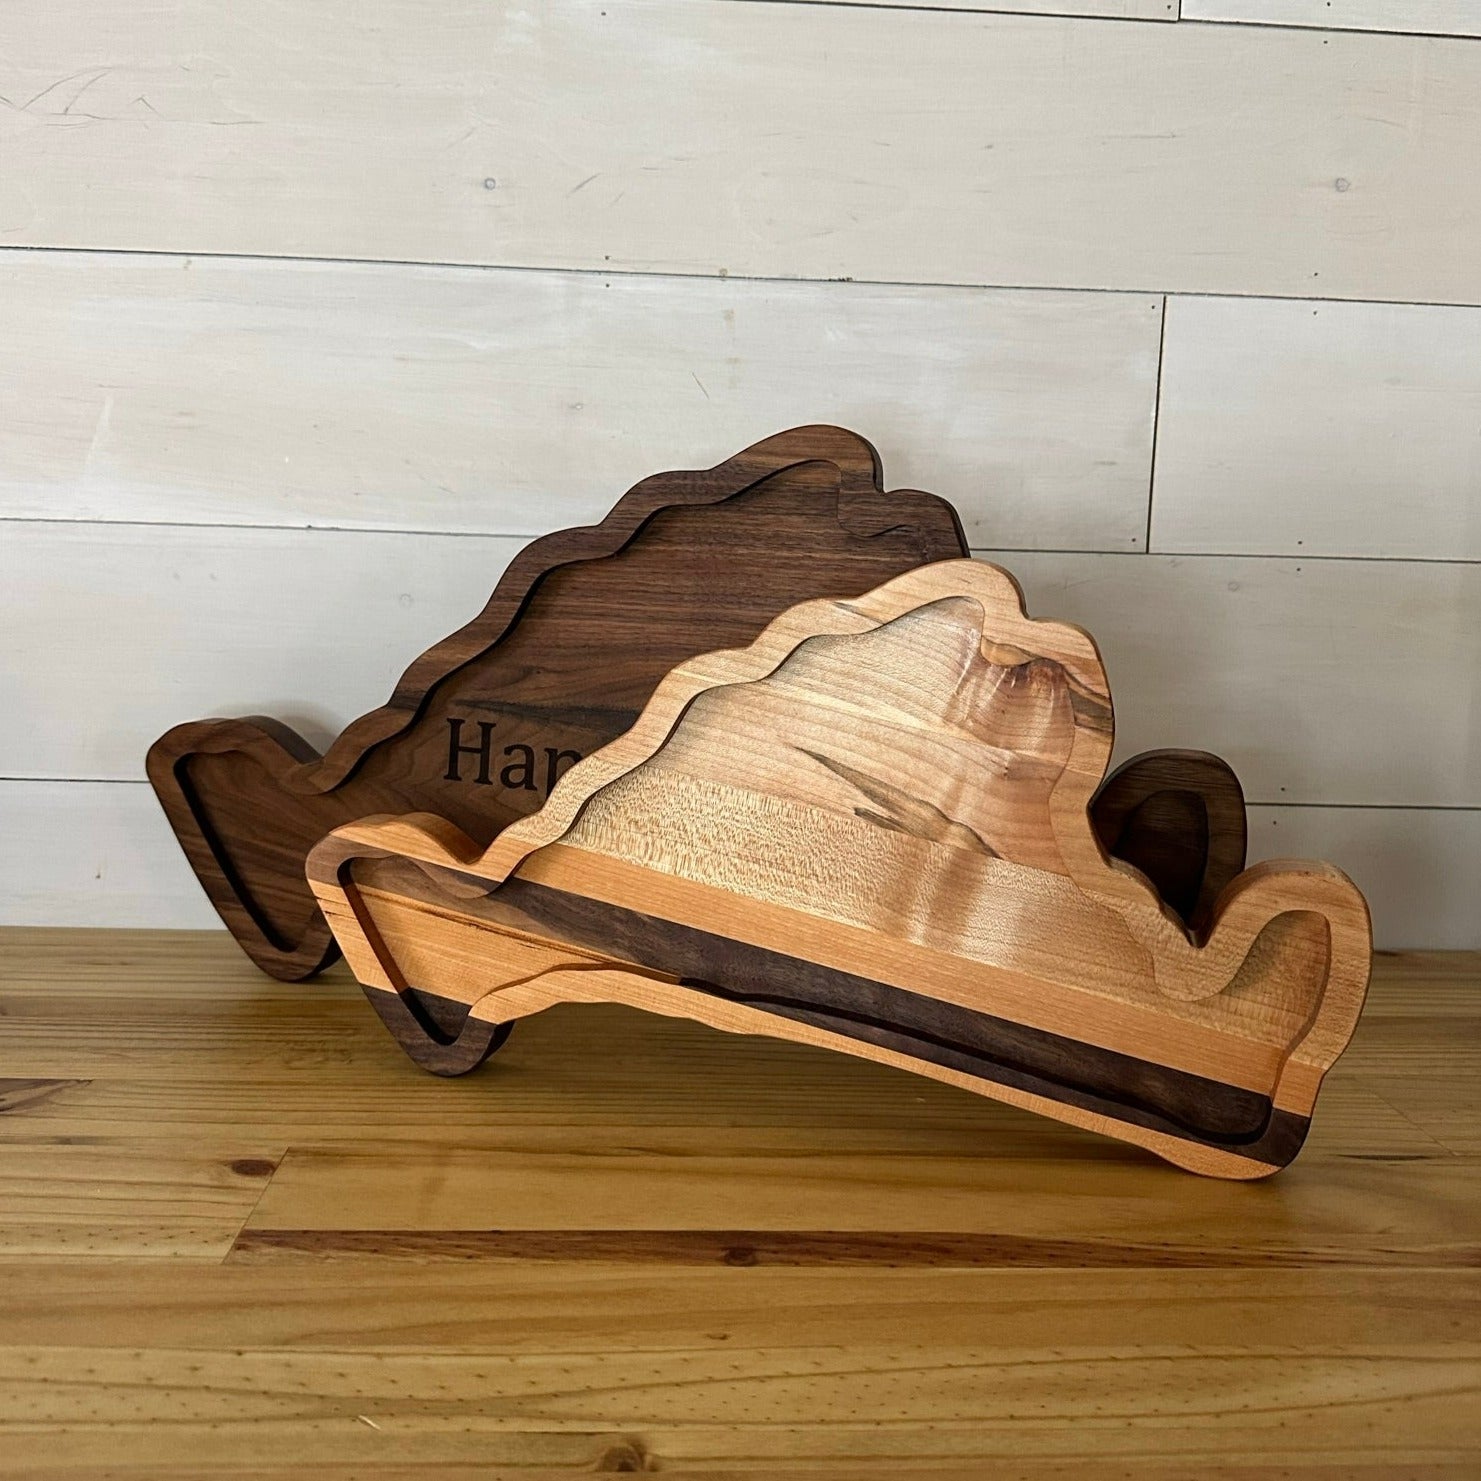 Martha's Vineyard-inspired charcuterie board, crafted from premium wood